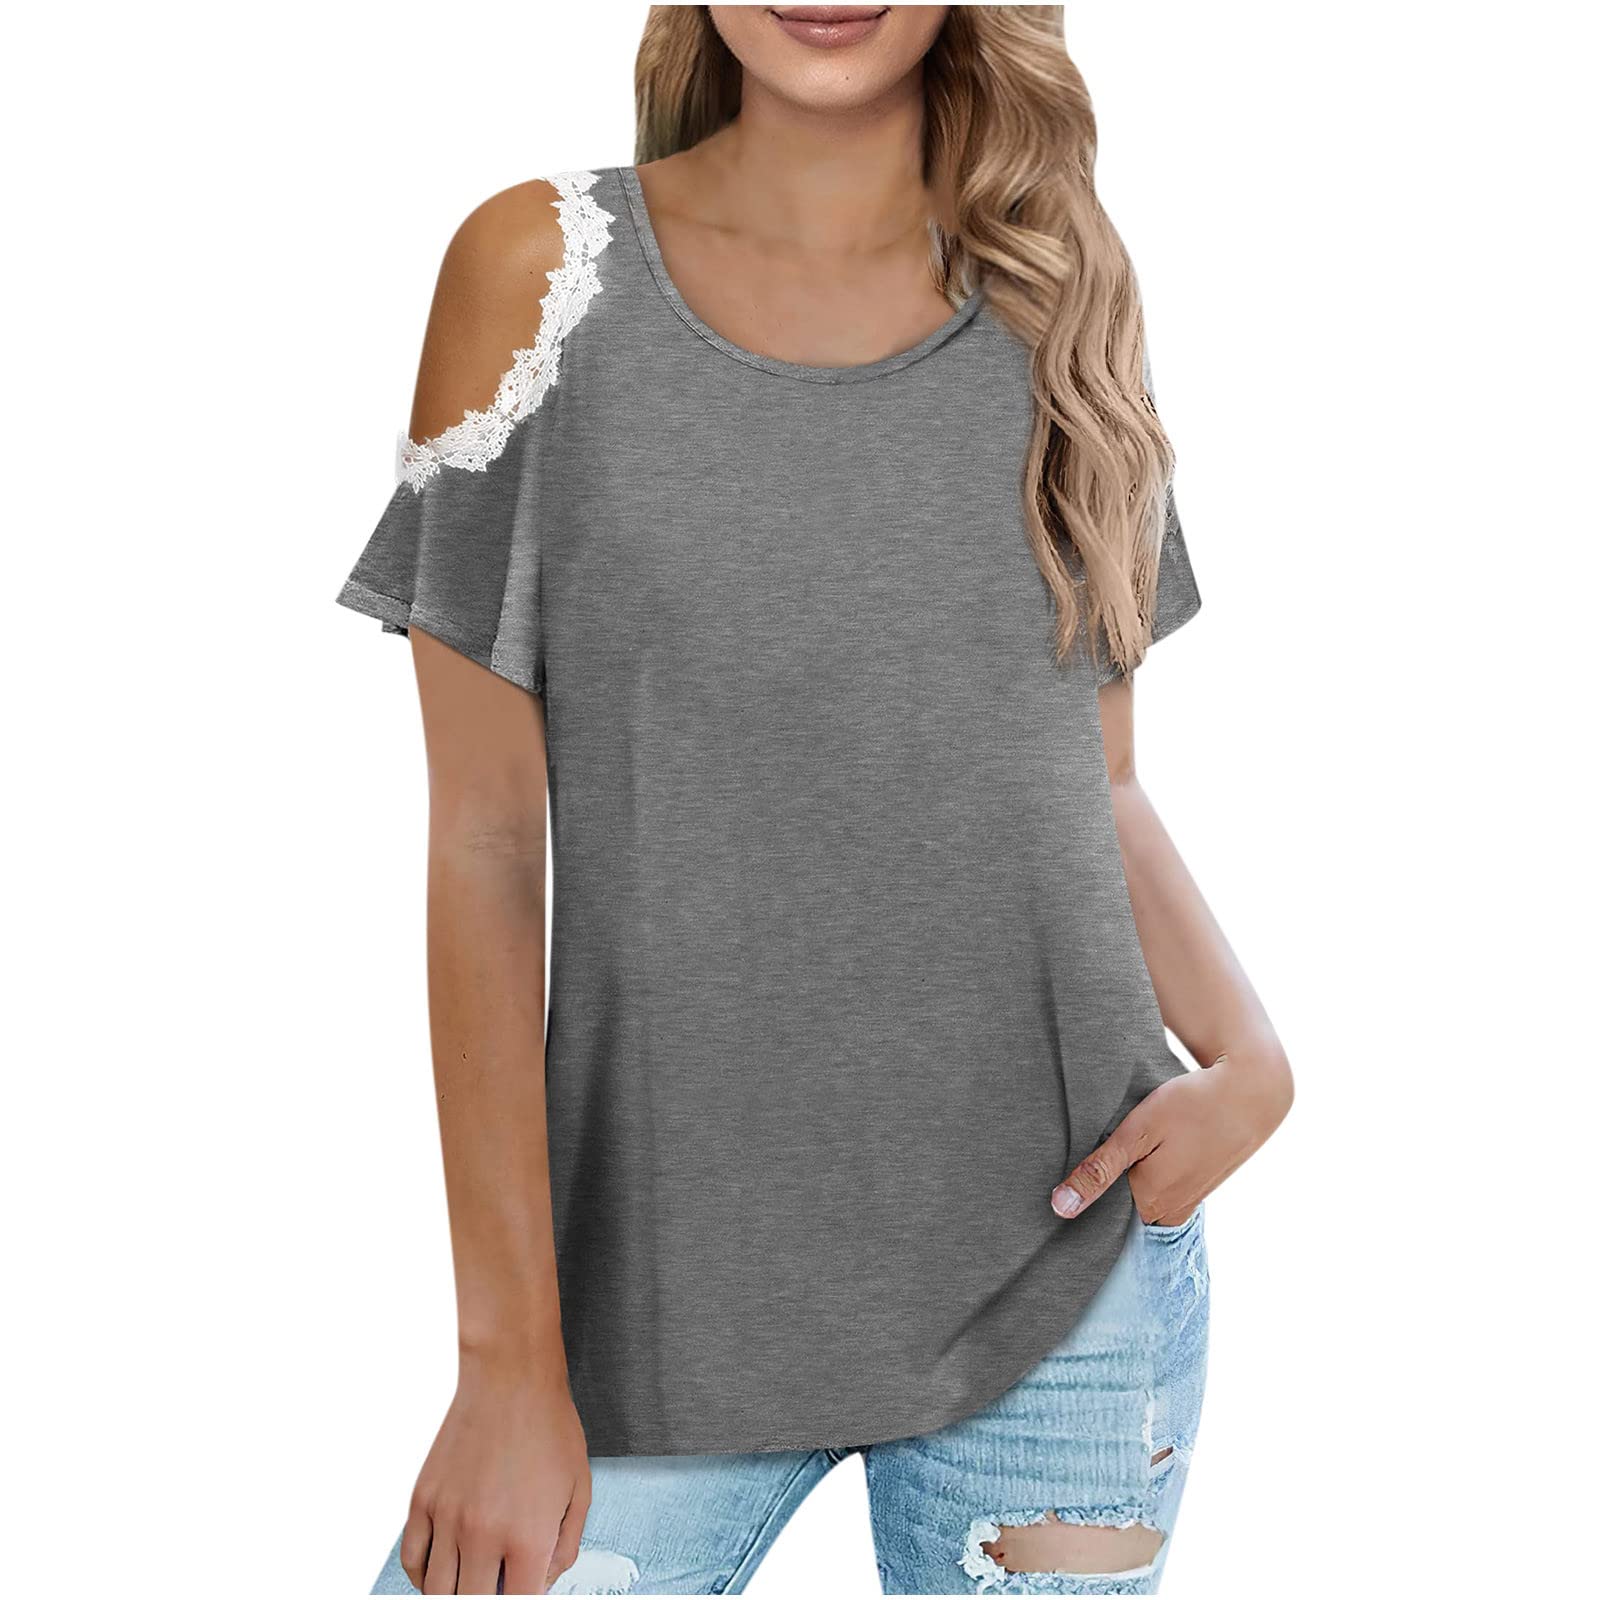 Women Plus Size Summer Tops Short Sleeve V-Neck Graphic Print Large Ladies  Blouses Loose Pullover Tee Shirt XL-5XL 